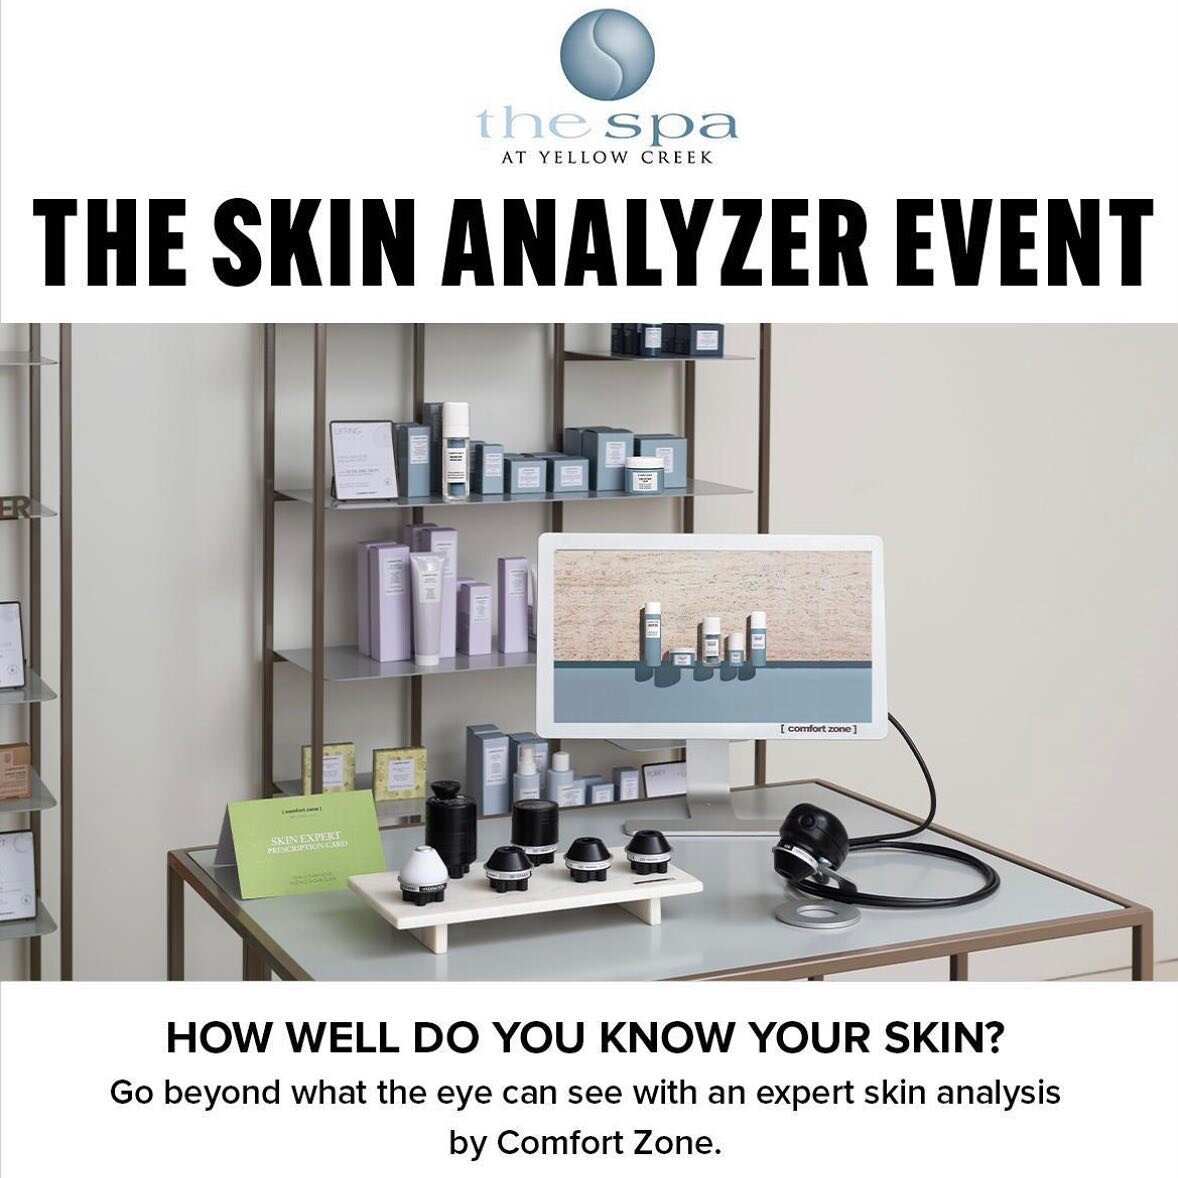 HOW WELL DO YOU KNOW YOUR SKIN?
Go beyond what the eye can see with an expert skin analysis by Comfort Zone.

Using the latest technology, the Comfort Zone Skin Analyzer machine uses 7 different lenses to help your therapist read the skin in more dep